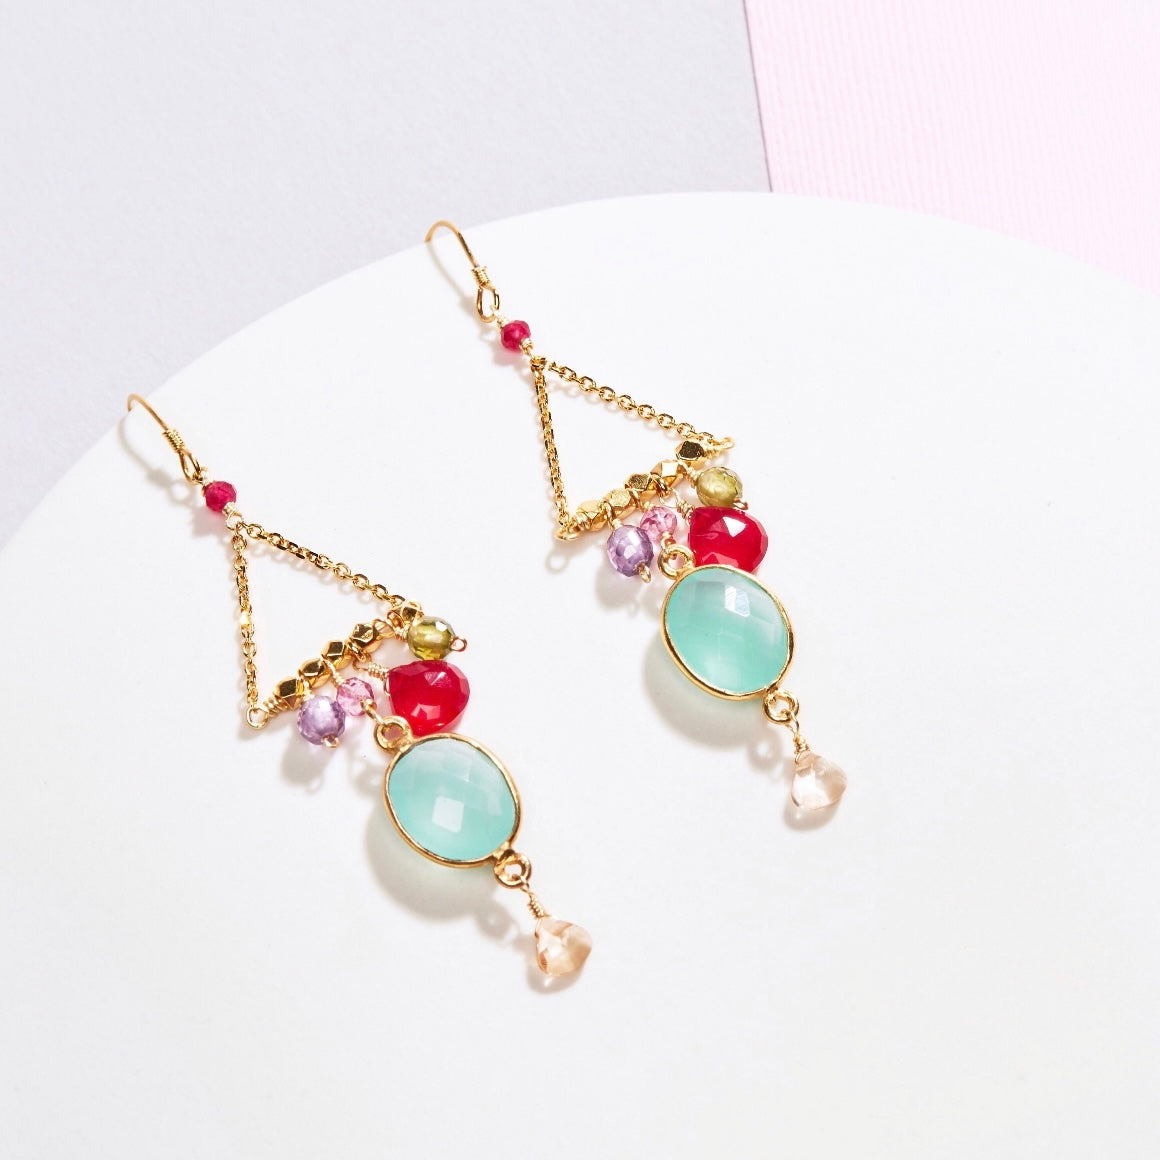 Bezel set blue chalcedony gemstones surrounded by faceted ruby quartz, peridot, amethyst and citrine accent stones Gold  Earrings 